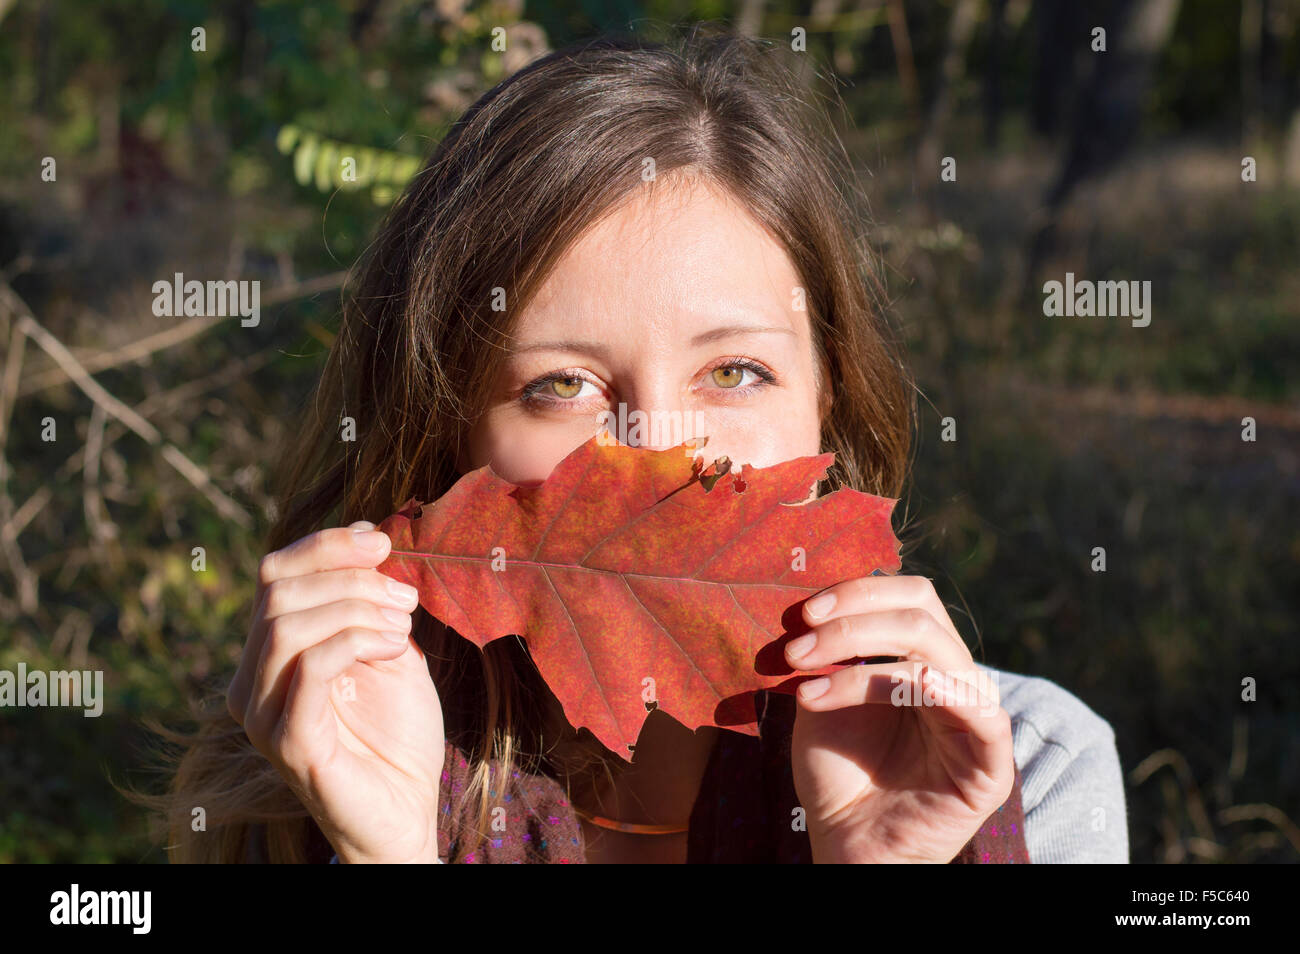 Autumn beauty portrait outdoors. Girl with gorgeous green eyes holding red autumn leaf over her face in the park Stock Photo